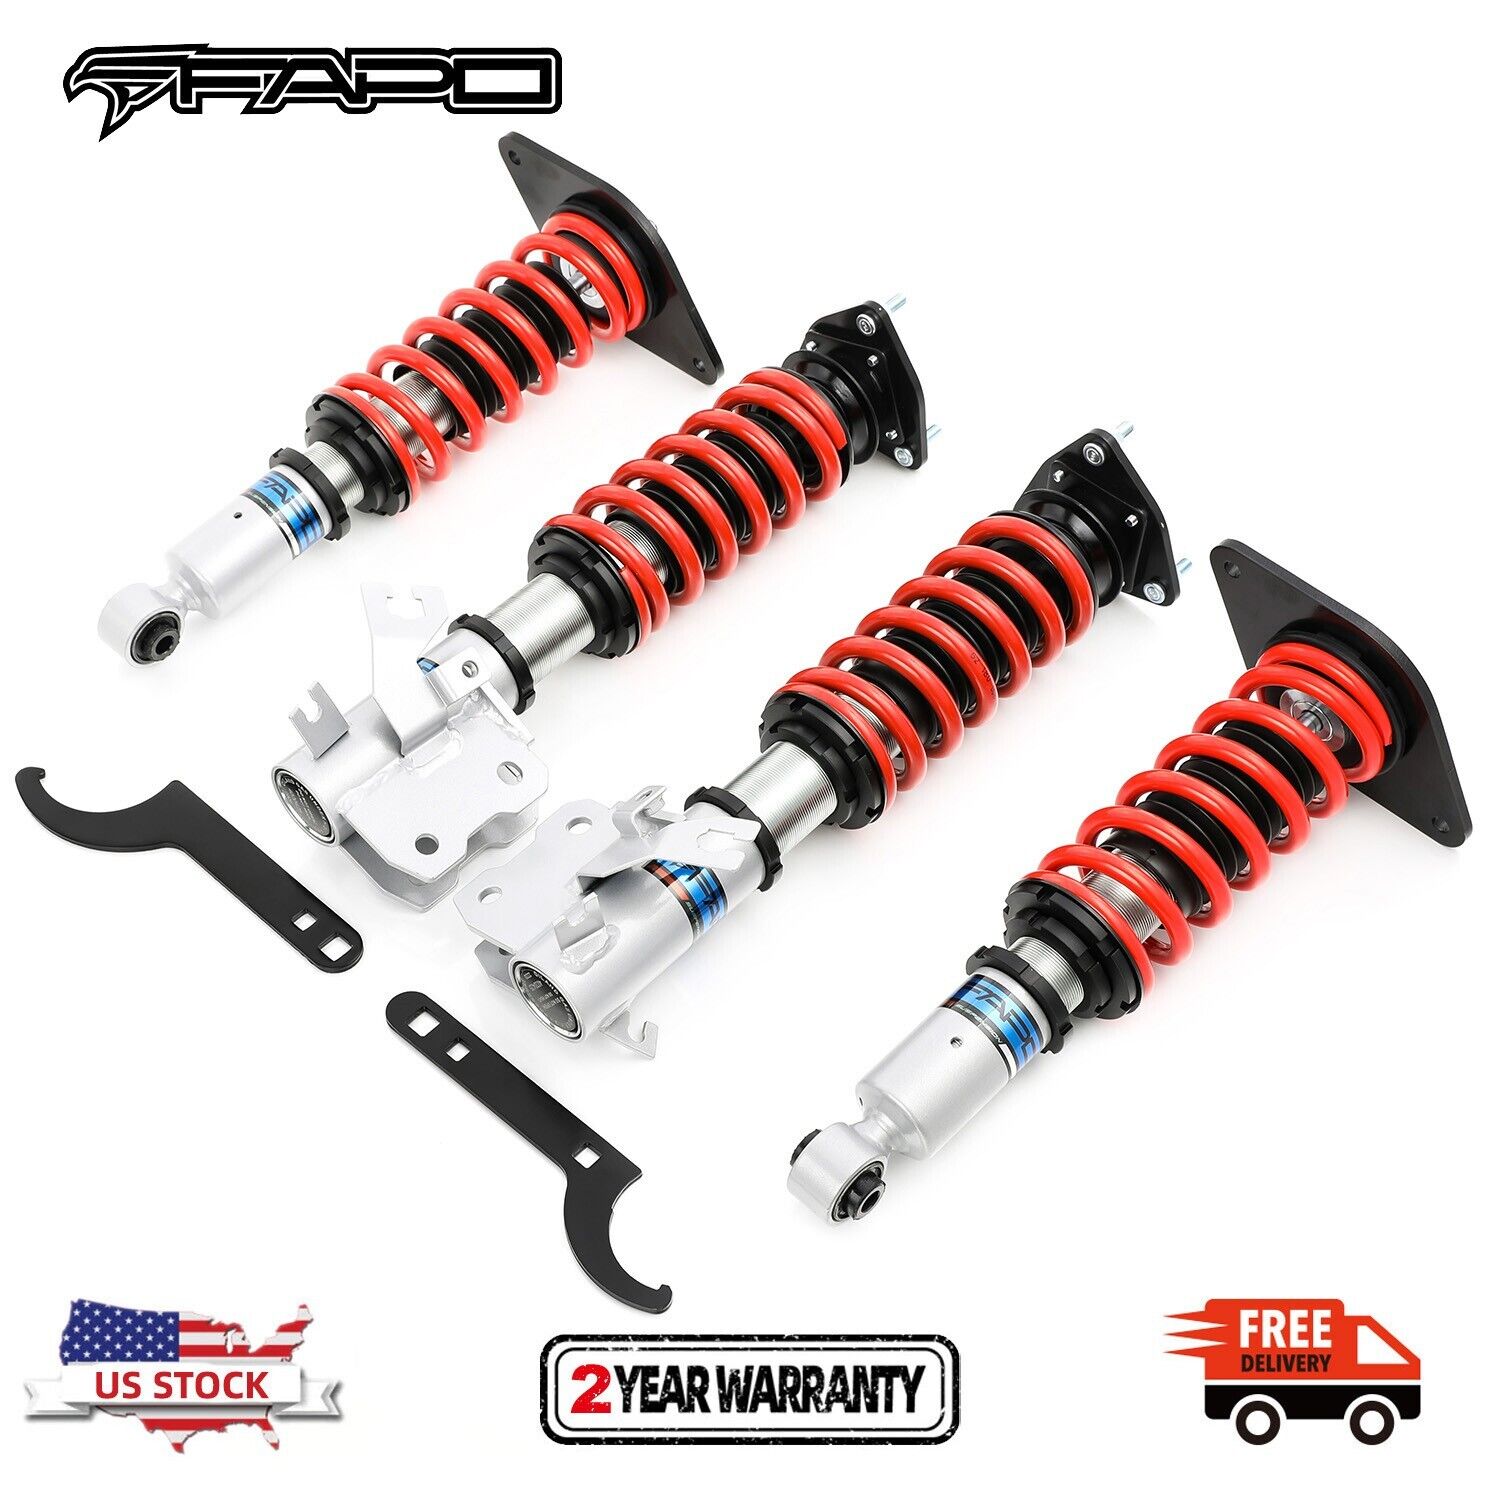 FAPO Shock Coilovers Lowering kits for Nissan Sentra 2000-2006 Adjustable height